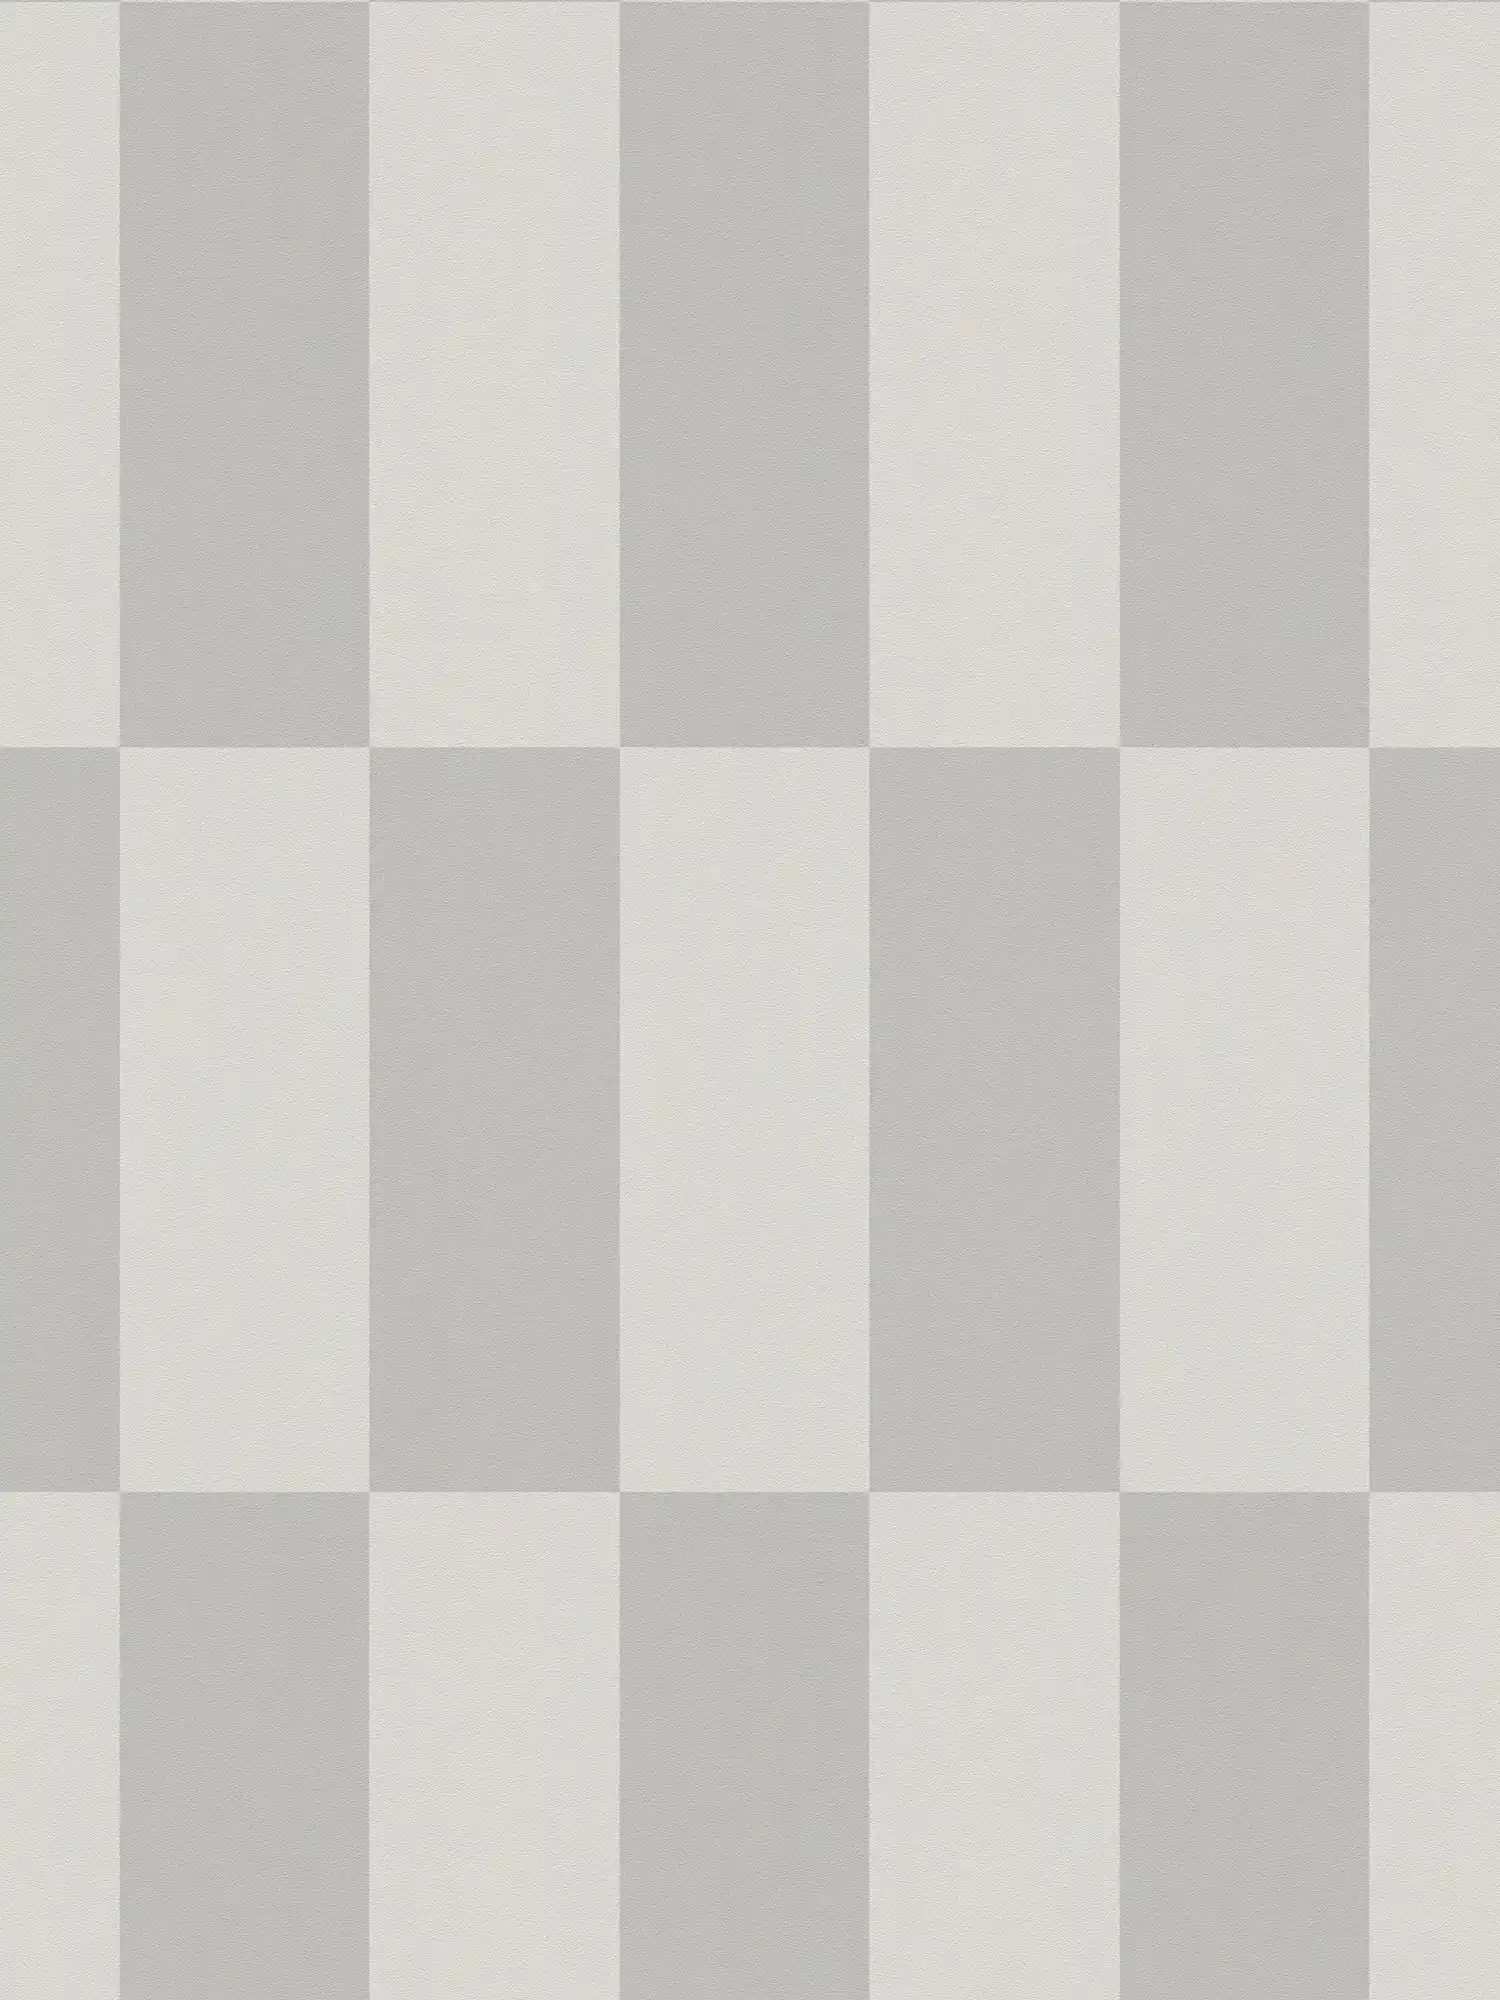         Non-woven wallpaper with graphic square pattern - grey
    